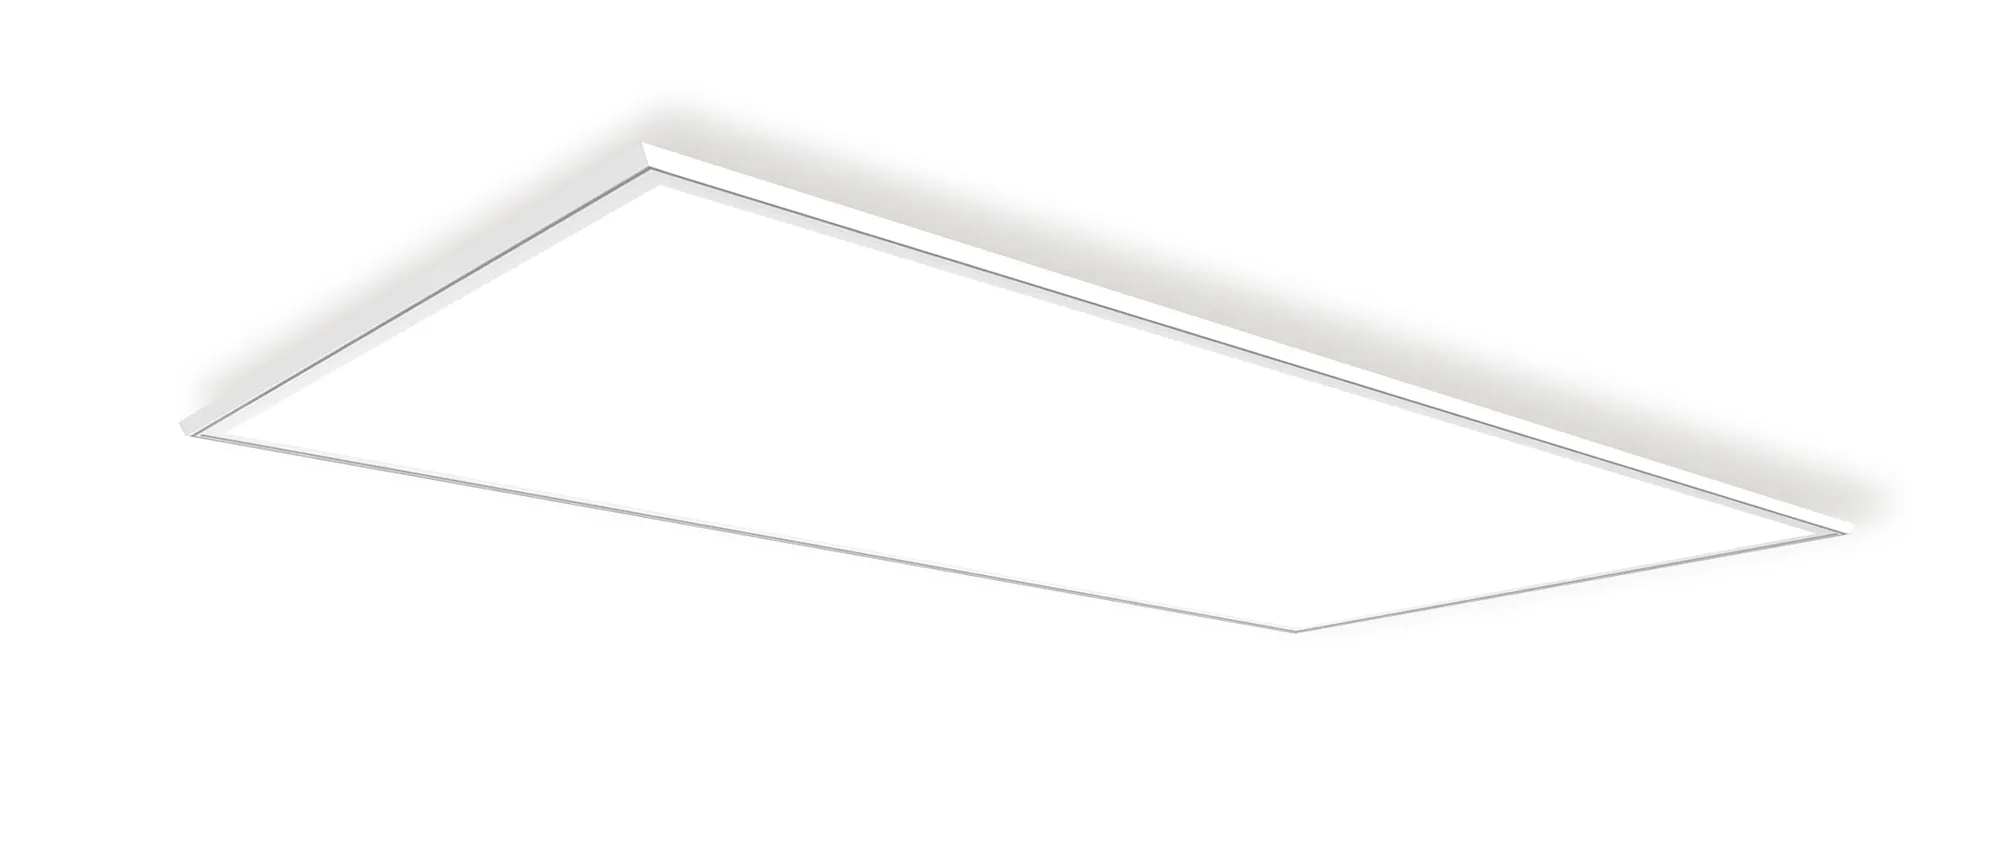 Panel X2 Ecovision Recessed Ceiling Luminaires Techtouch Square/Rectangular Recess Ceiling